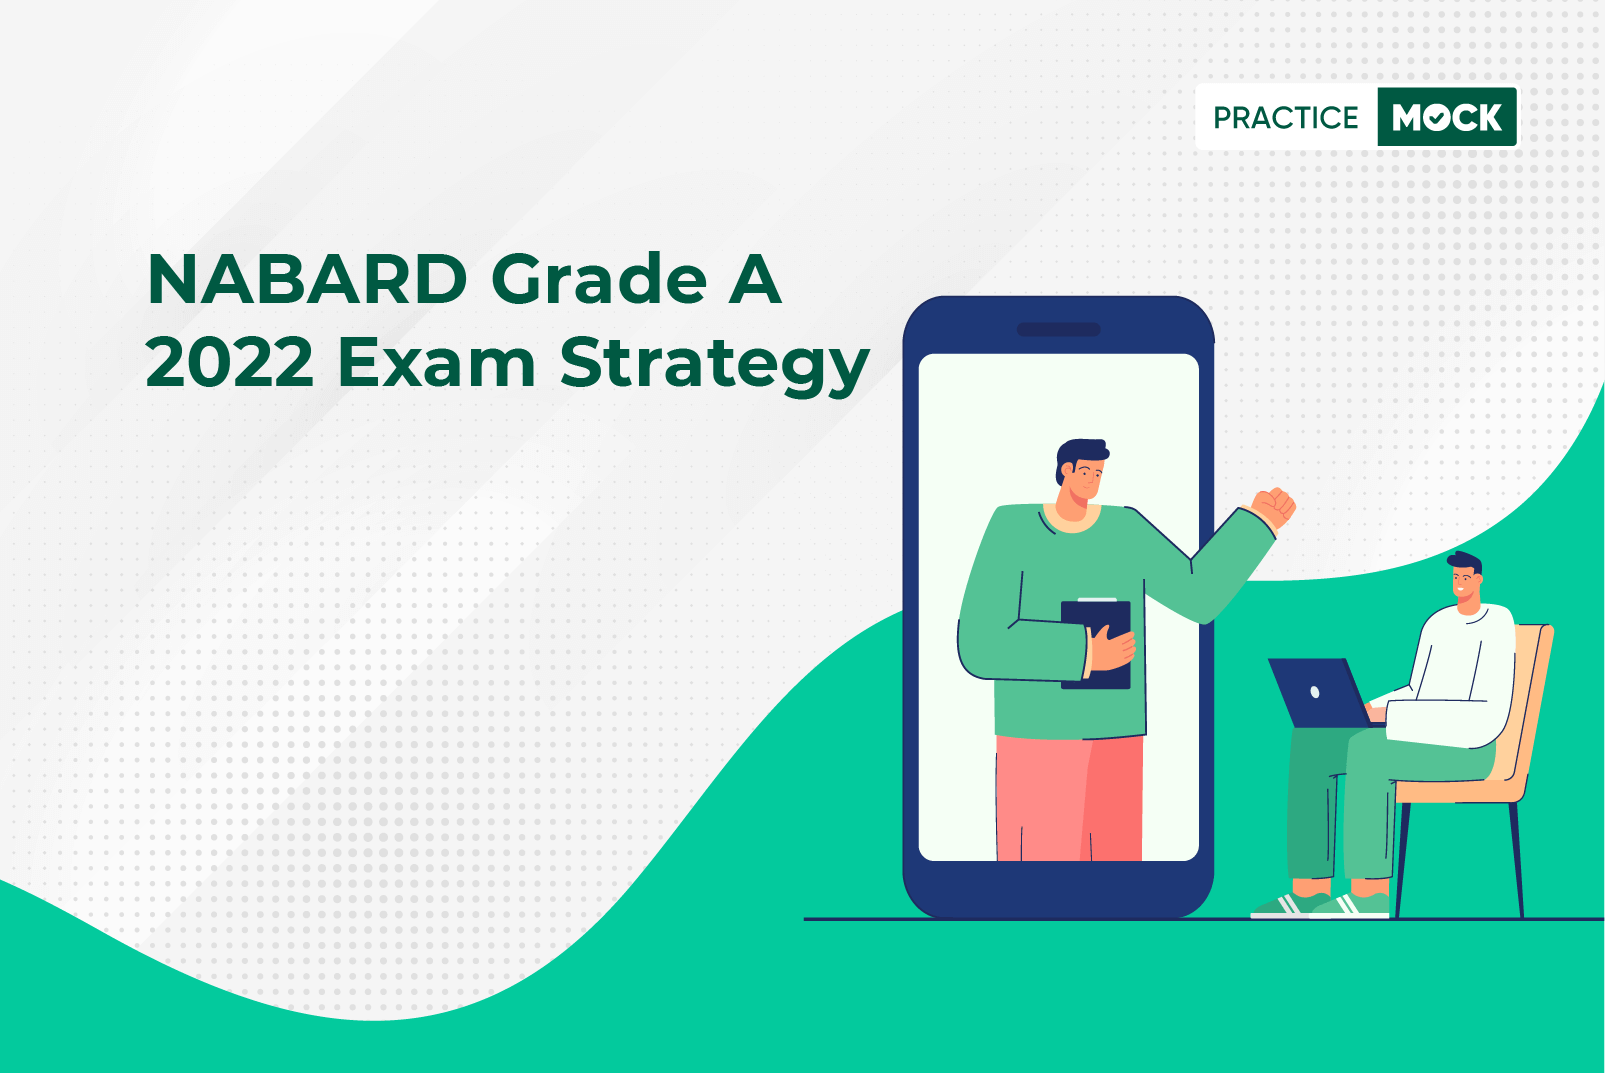 Section-Wise Tips to Clear NABARD Grade A 2022 Exam